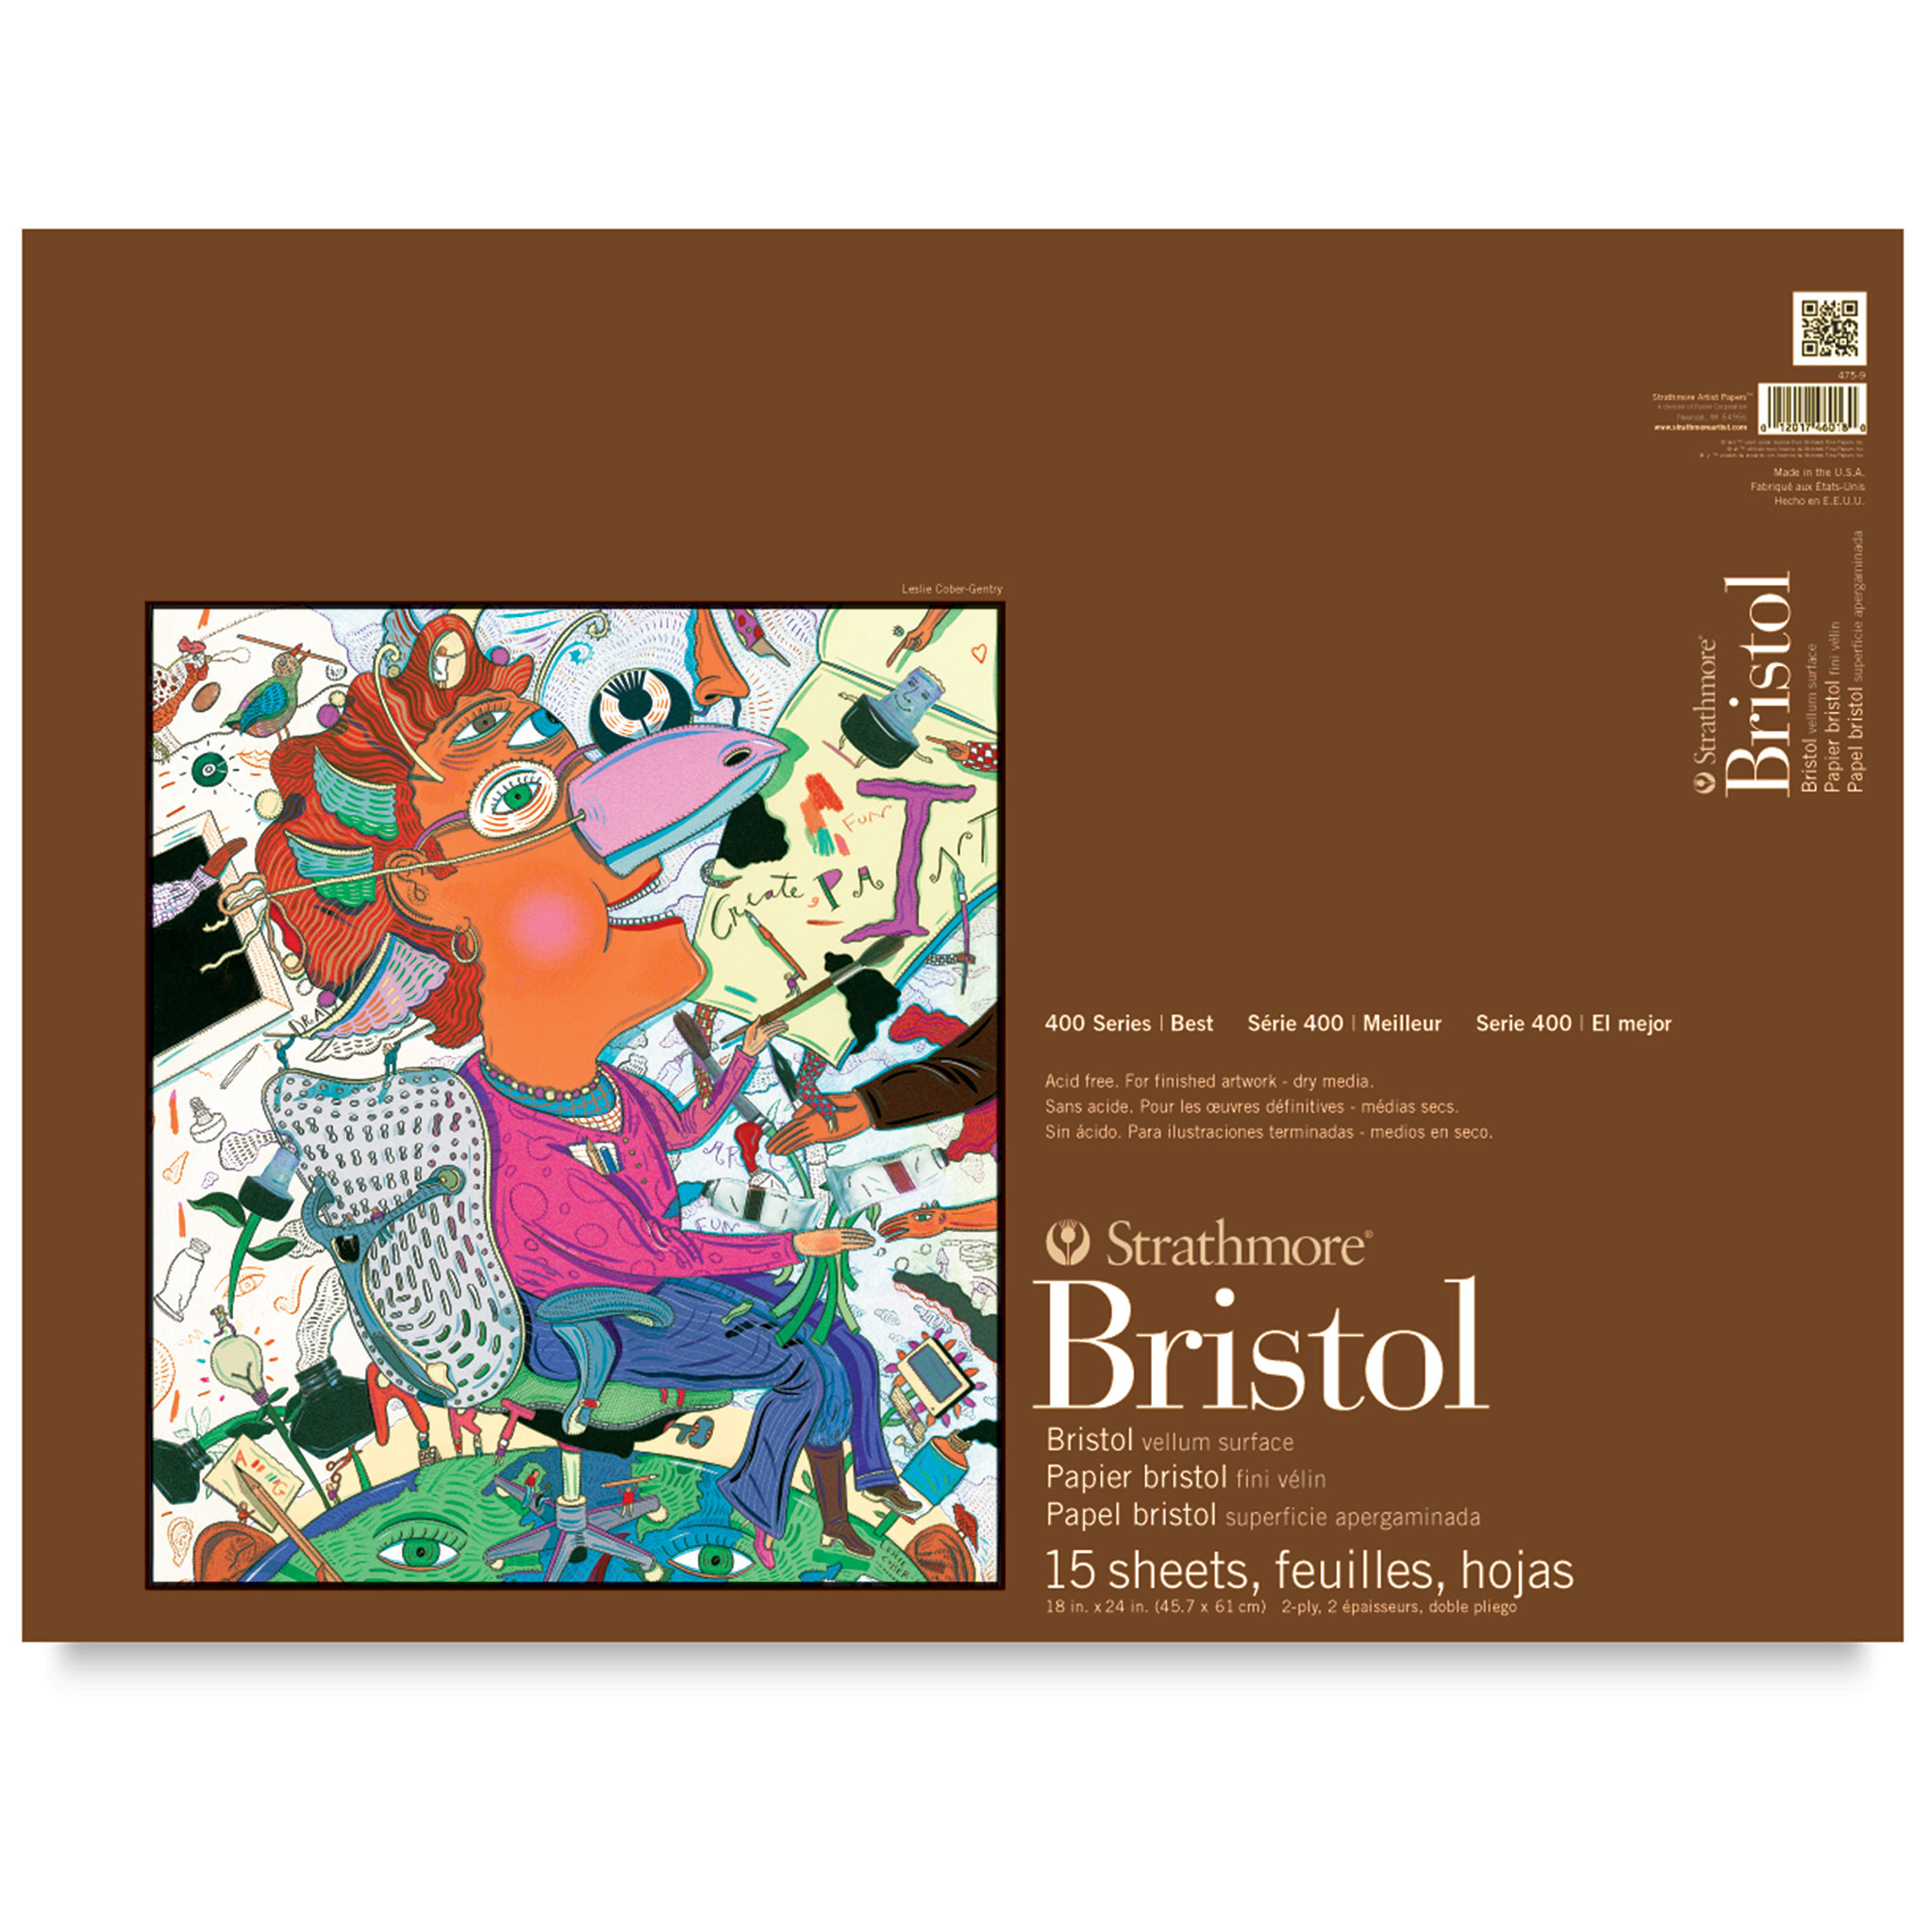 Strathmore 400 Series Bristol Paper Pad, Smooth, Tape Bound, 9x12 inches,  15 Sheets (2-ply) - Artist Paper for Adults and Students - Markers, Pen and